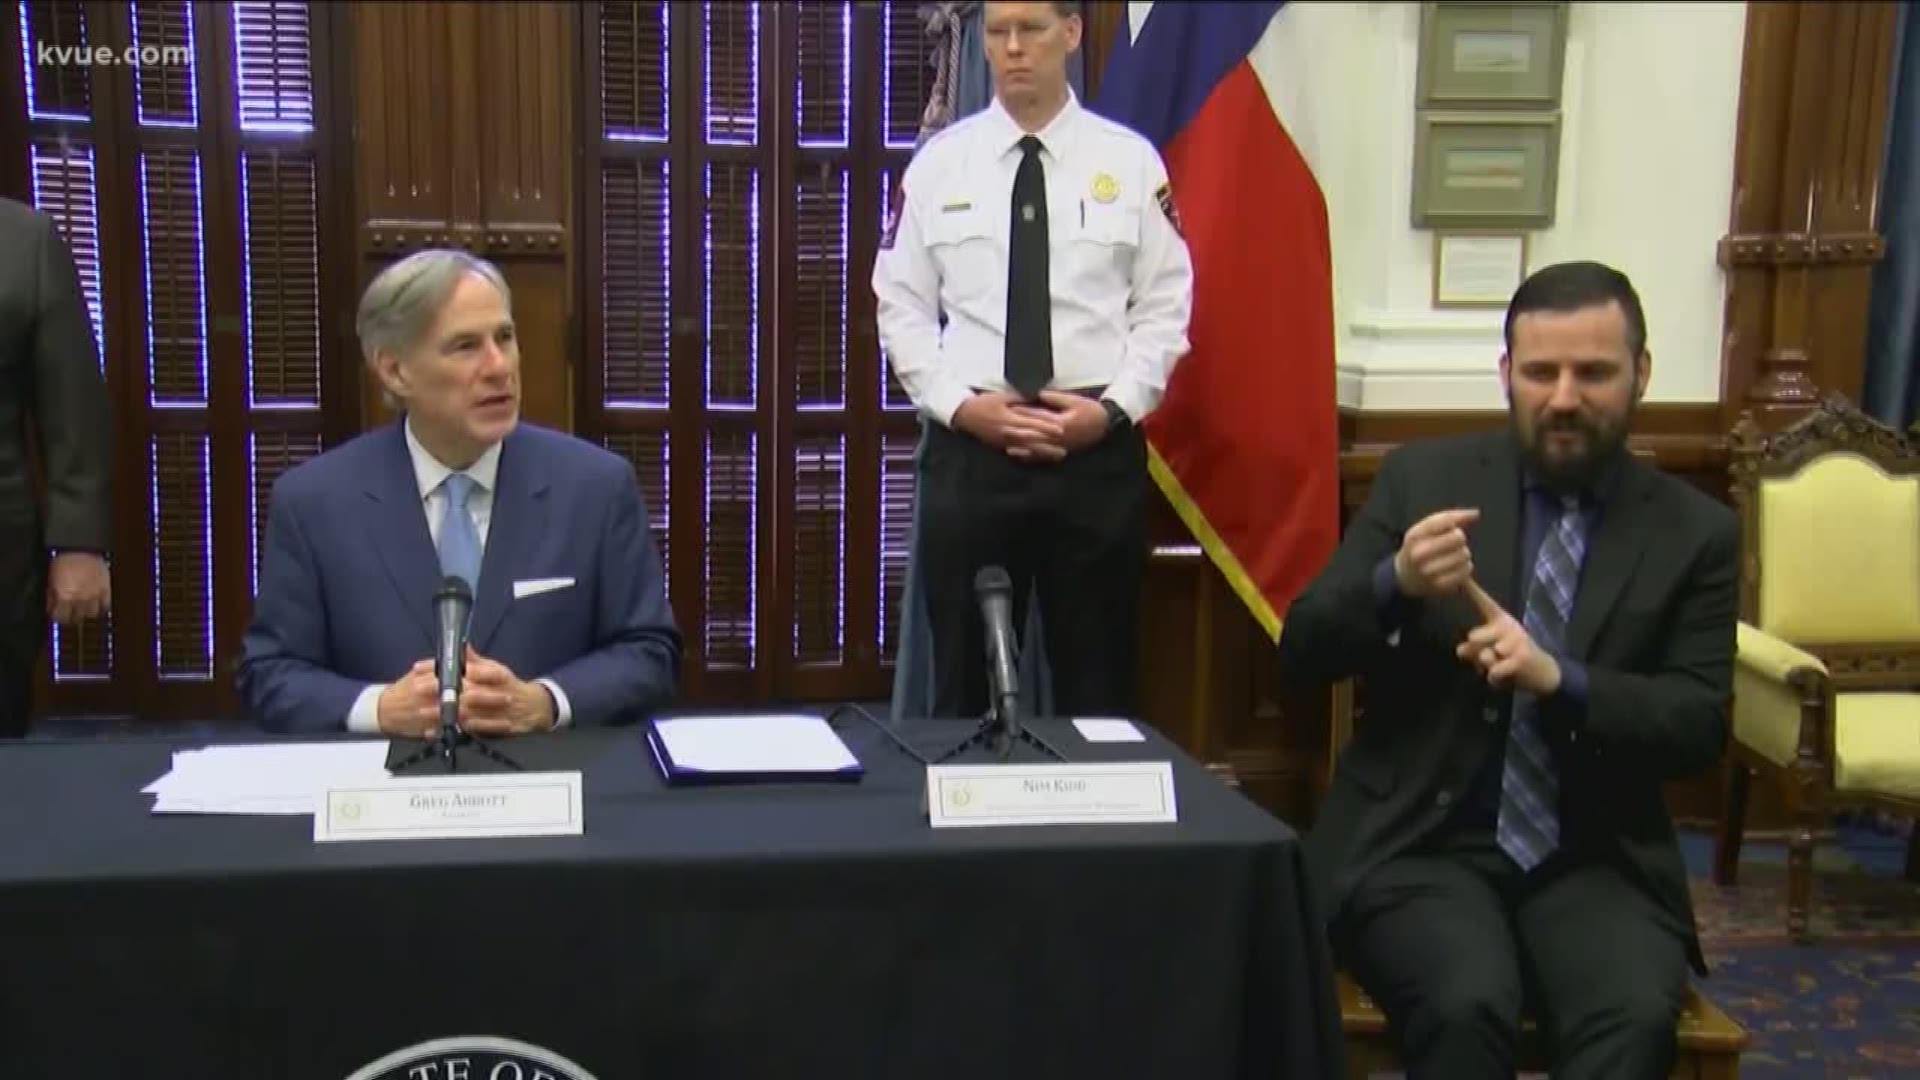 Gov. Greg Abbott held a press conference, were he announced two executive orders to help "free up countless hospital beds" and announced a coronavirus strike force.